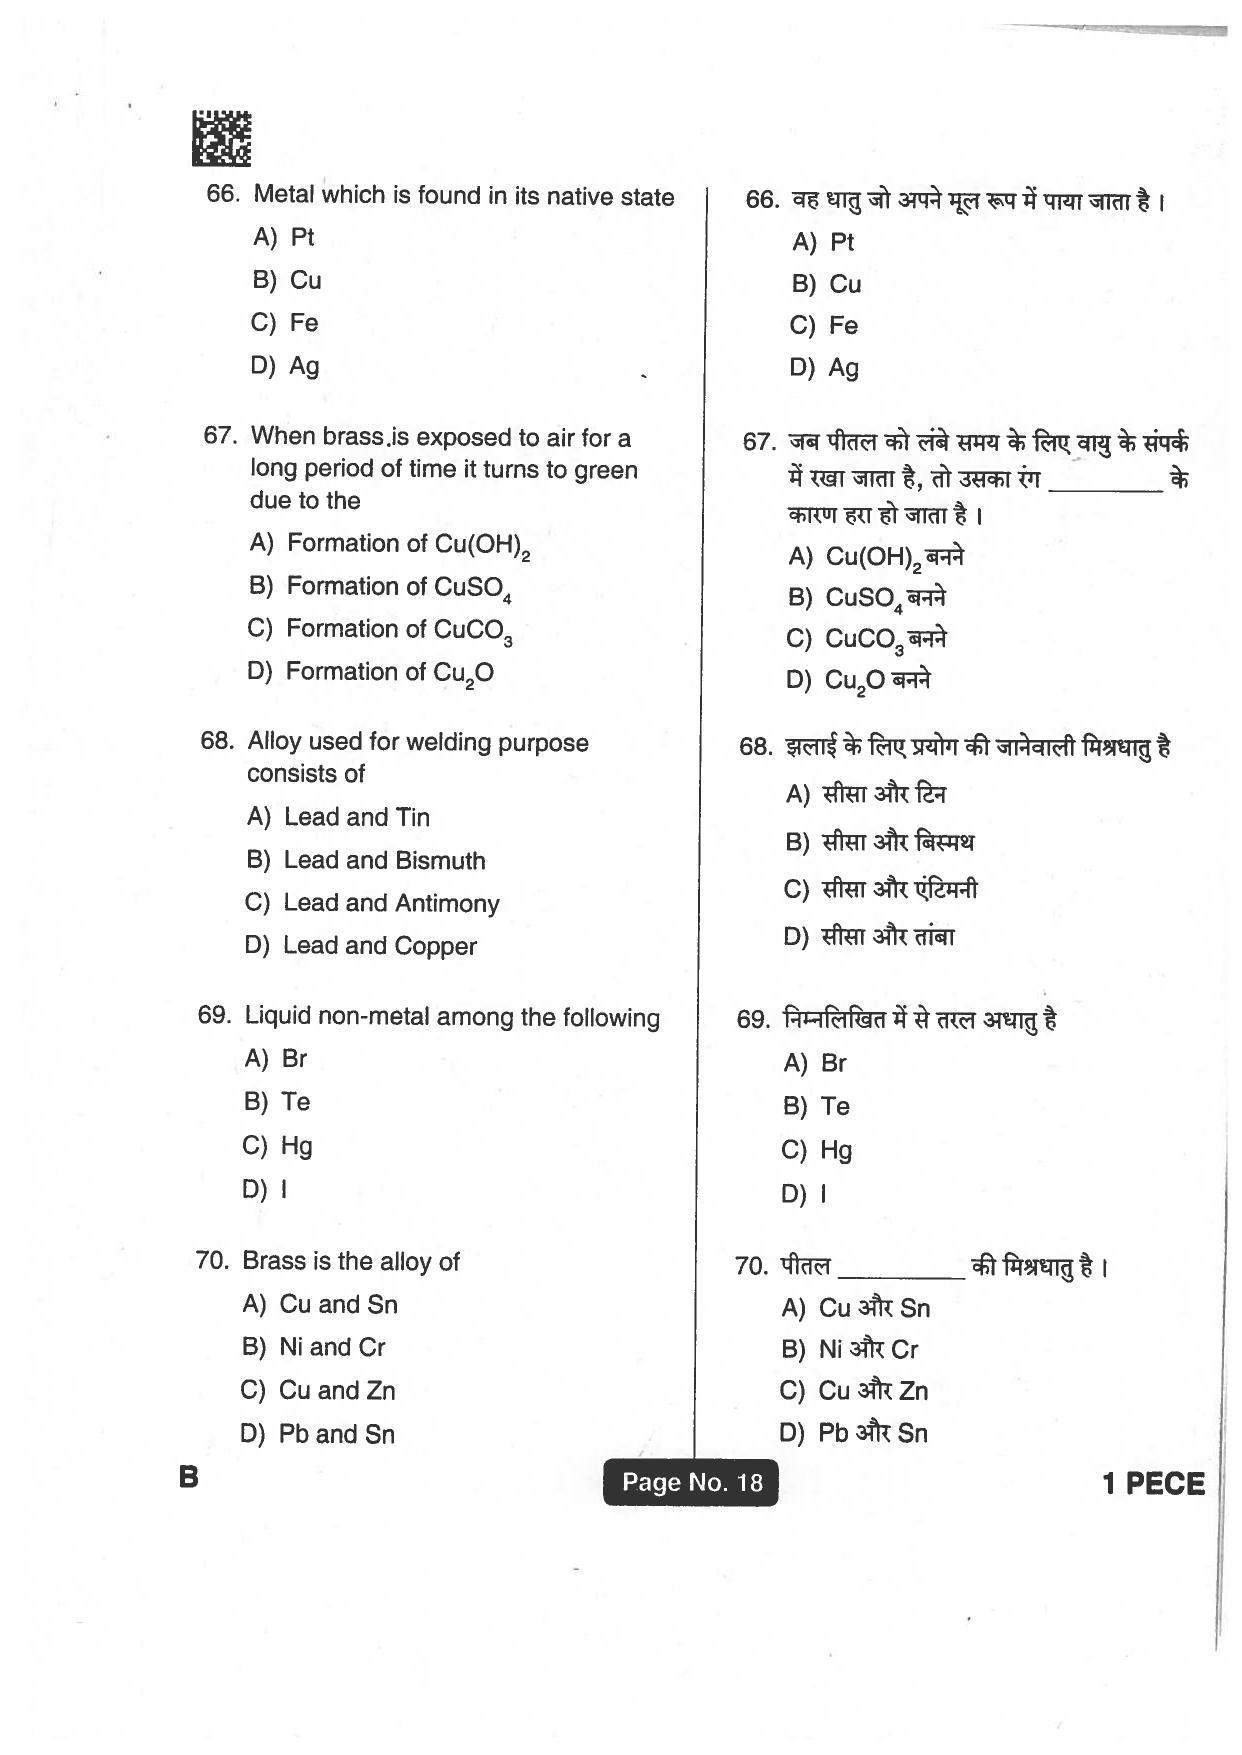 Jharkhand Polytechnic SET B 2018 Question Paper with Answers - Page 17